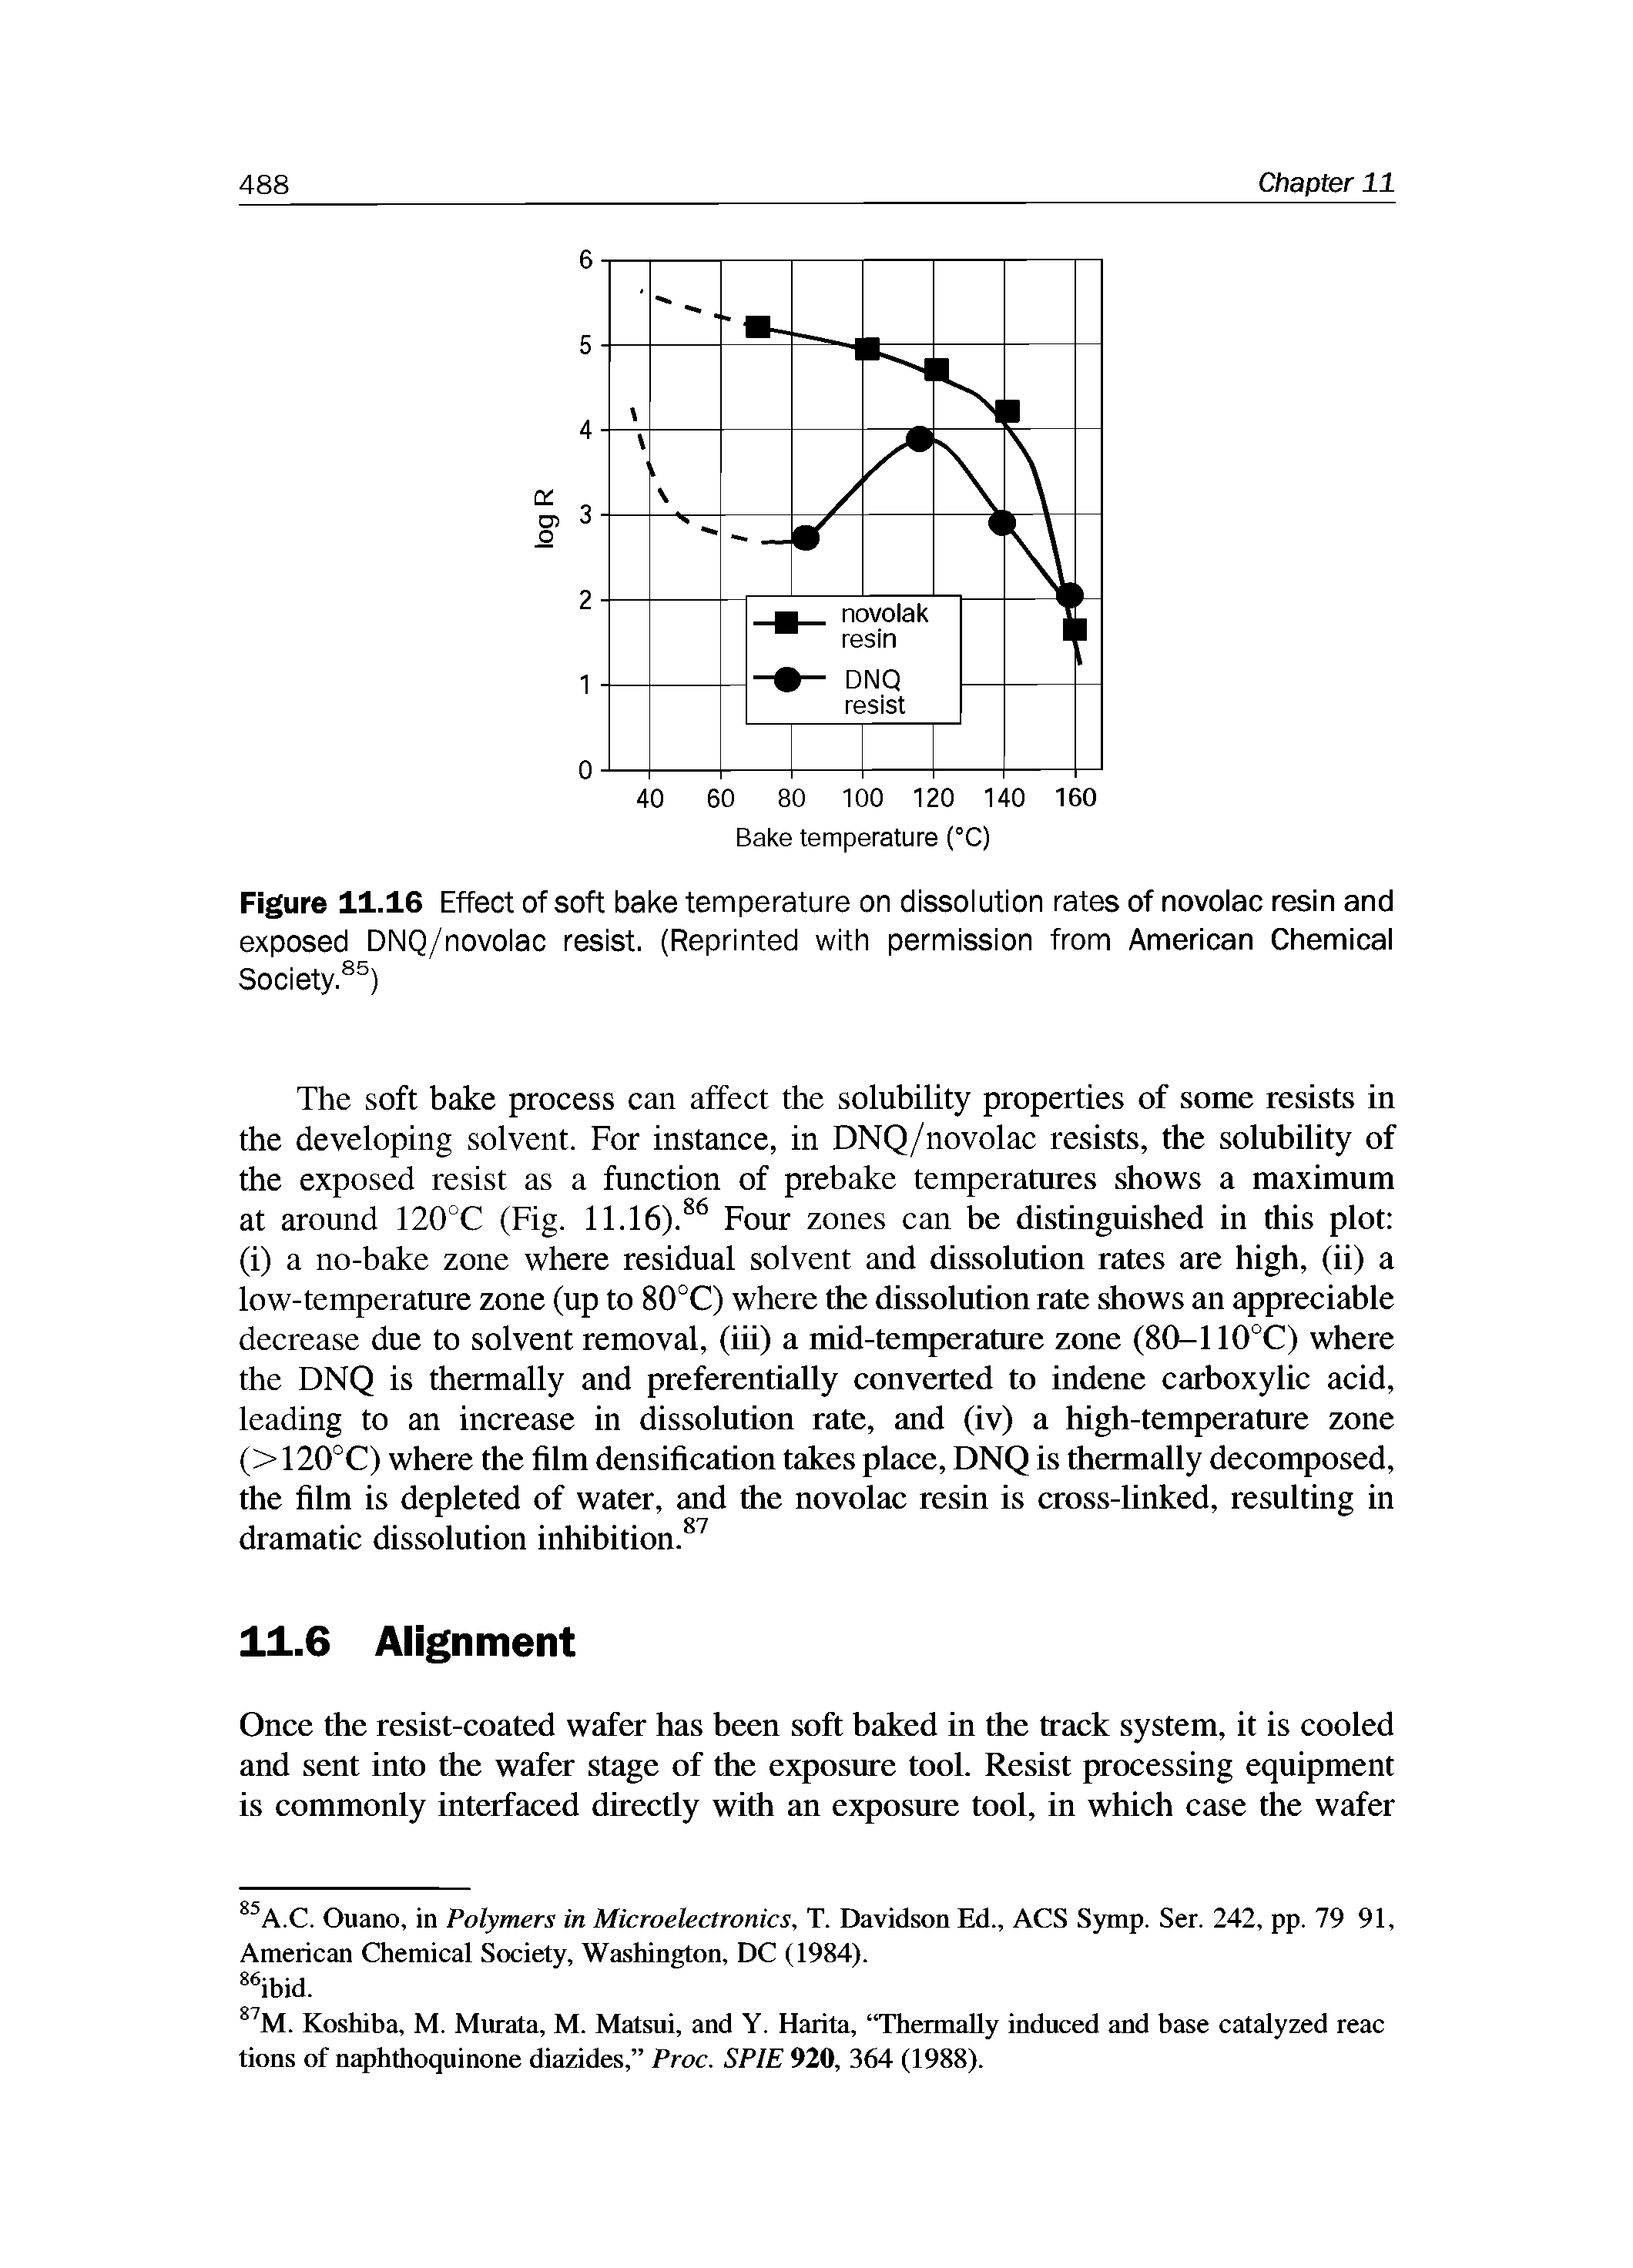 Figure 11.16 Effect of soft bake temperature on dissolution rates of novolac resin and exposed DNQ/novolac resist. (Reprinted with permission from American Chemical Society. )...